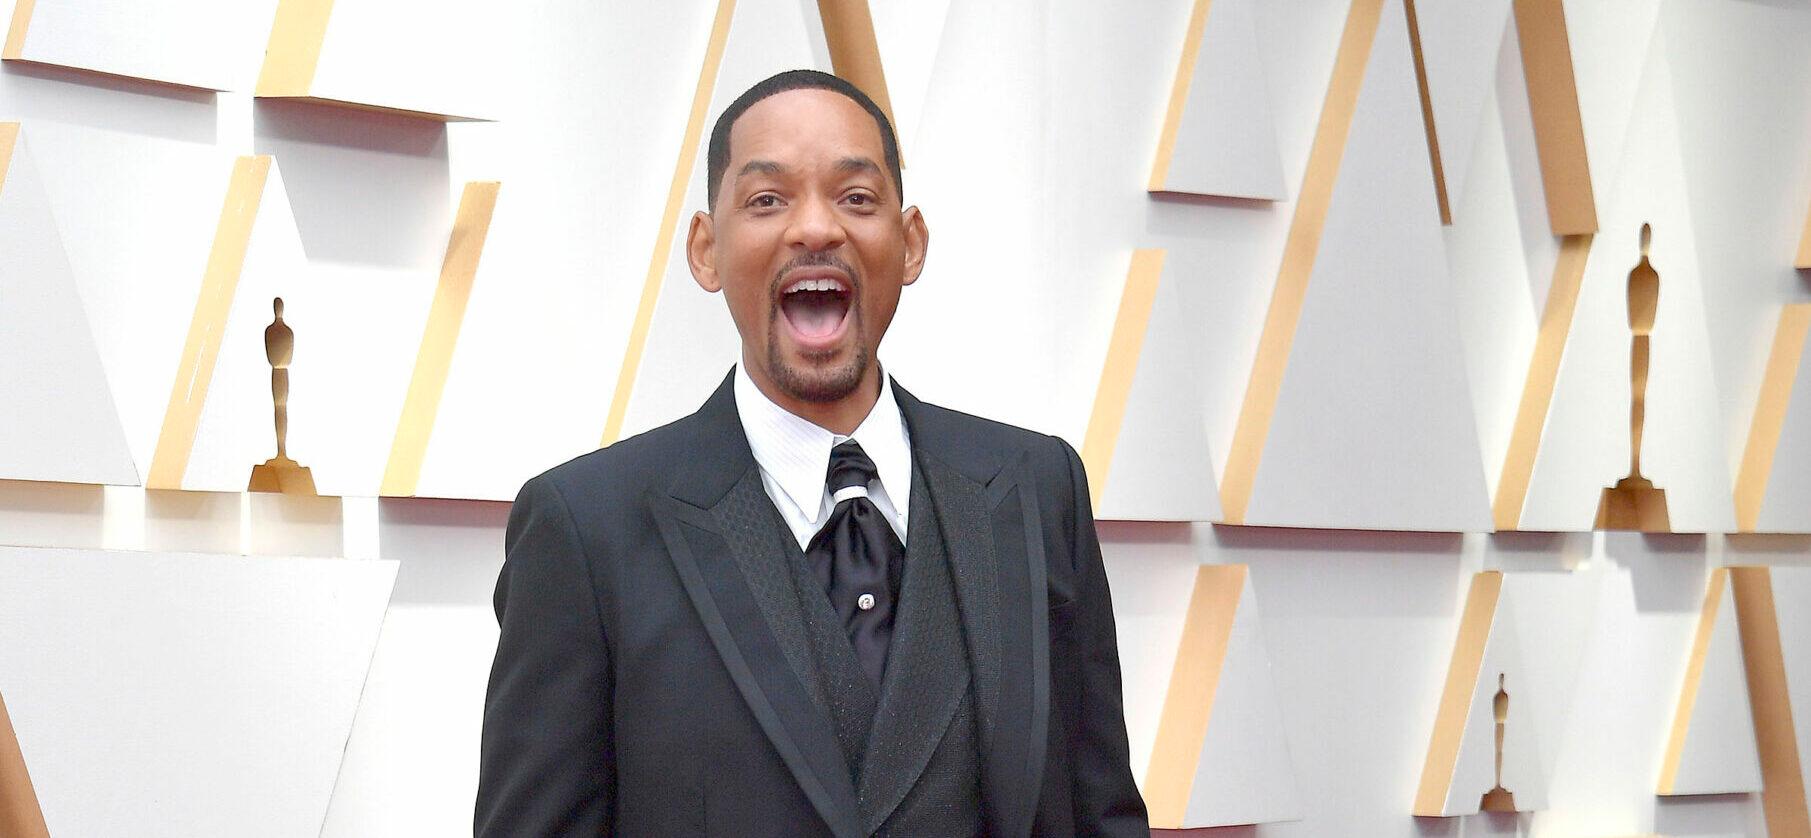 Will Smith took offence to Chris Rock's joke about Jade Pinkett-Smith's baldness